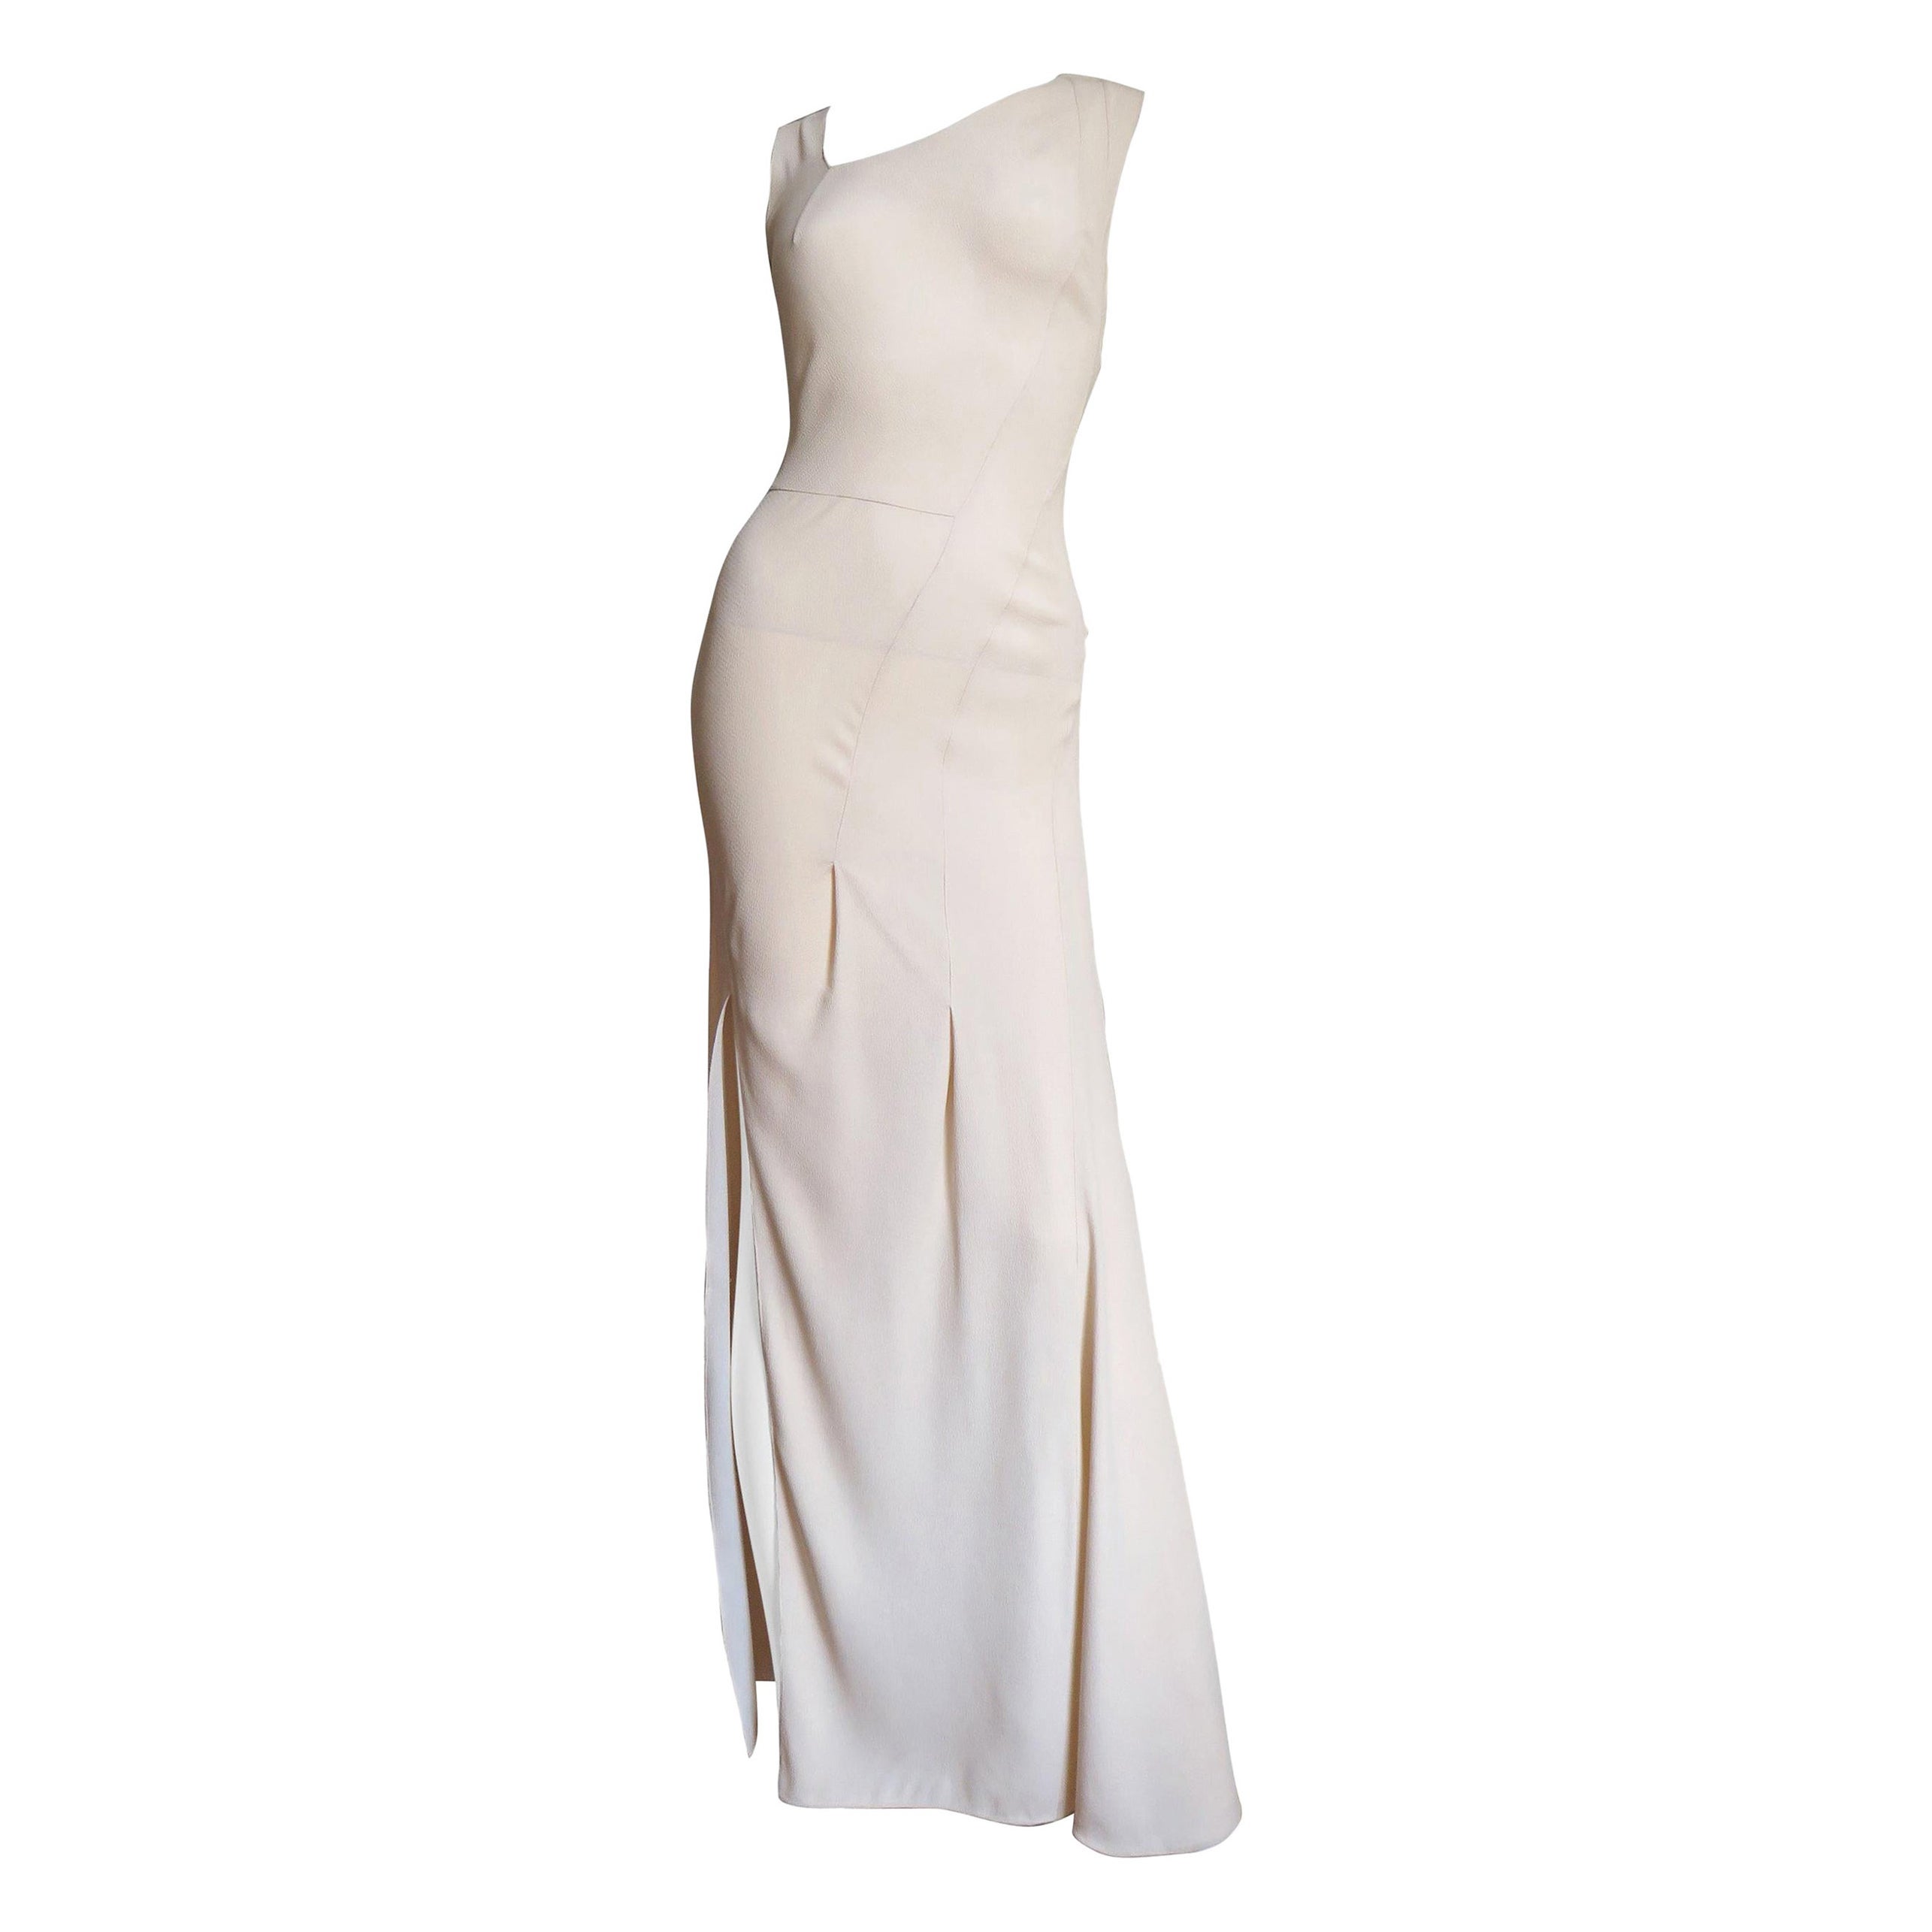 John Galliano for Christian Dior Pale Pink Silk Seam Gown For Sale